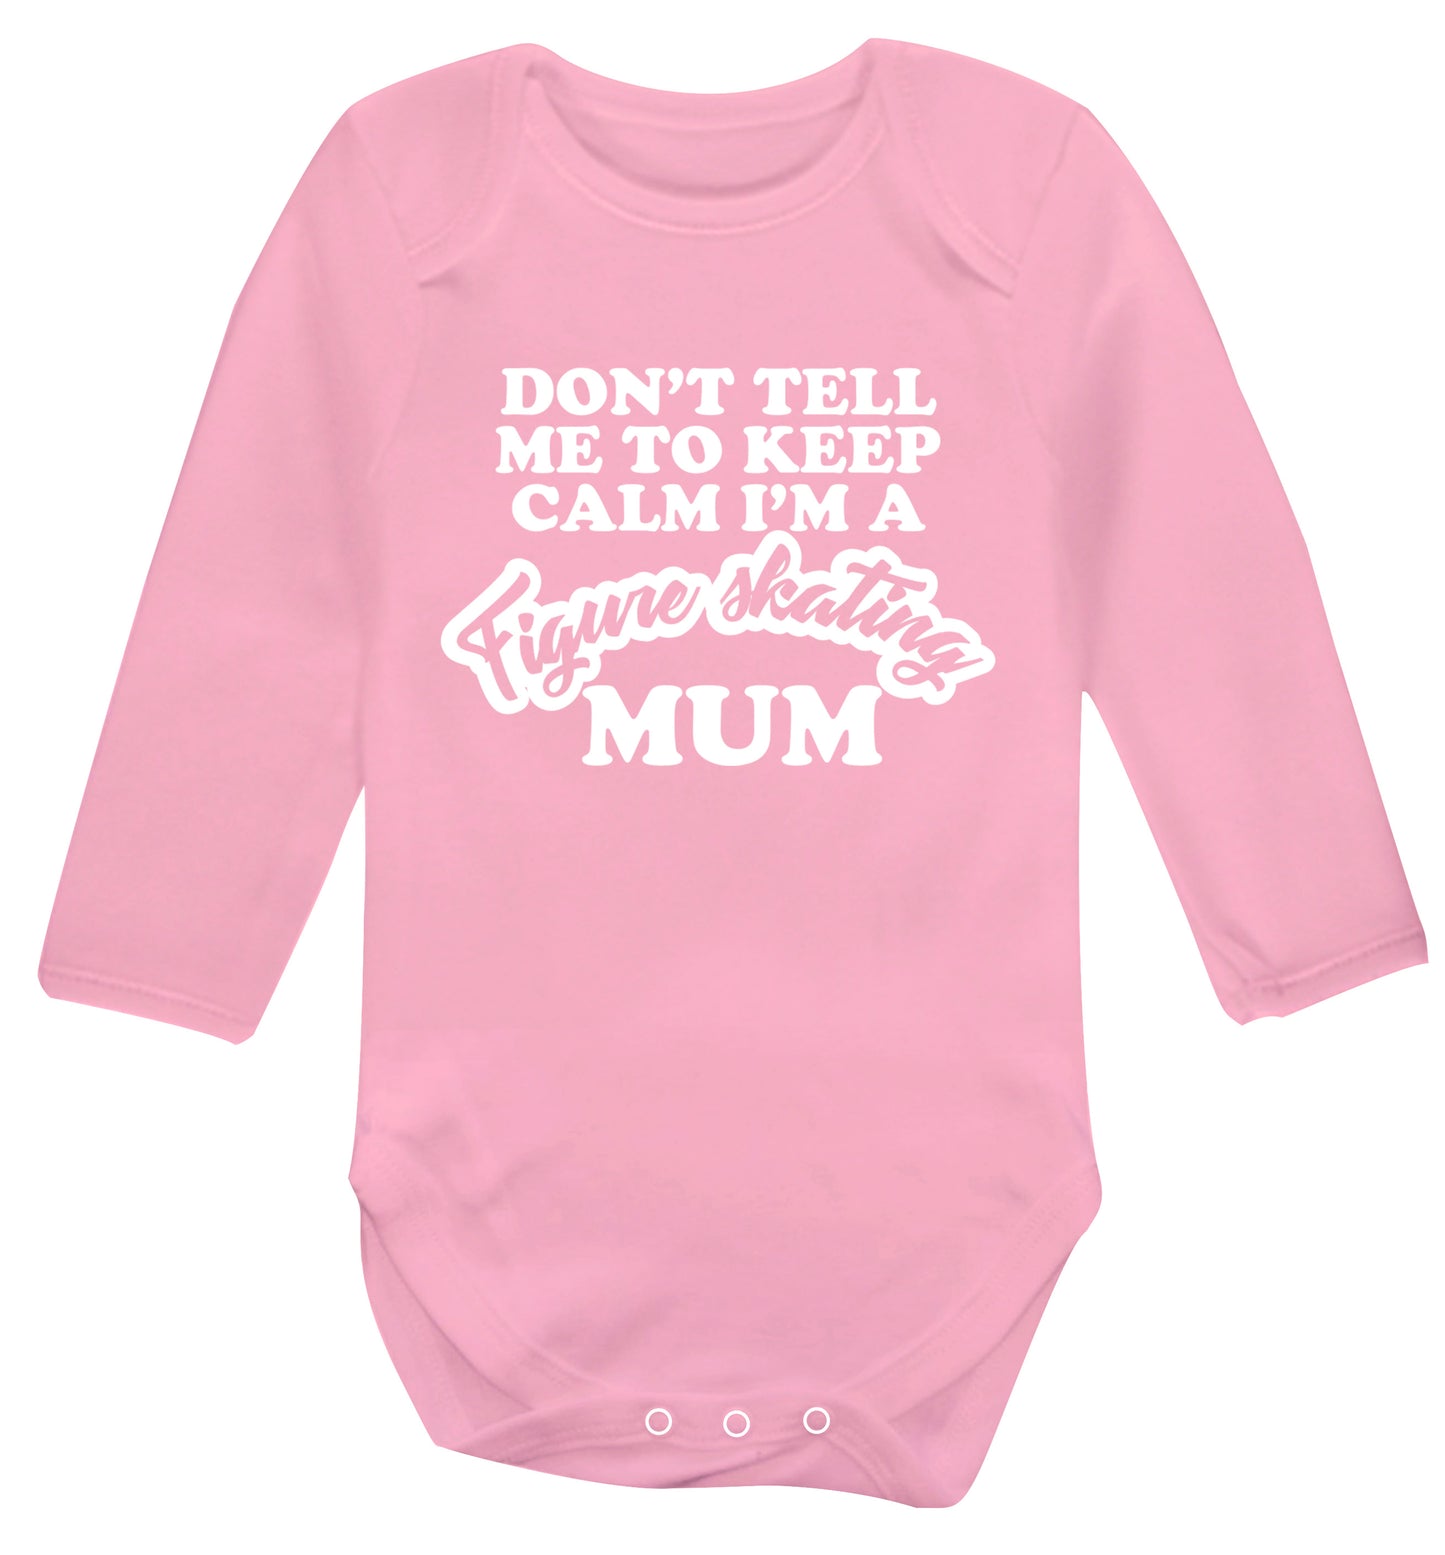 Don't tell me to keep calm I'm a figure skating mum Baby Vest long sleeved pale pink 6-12 months